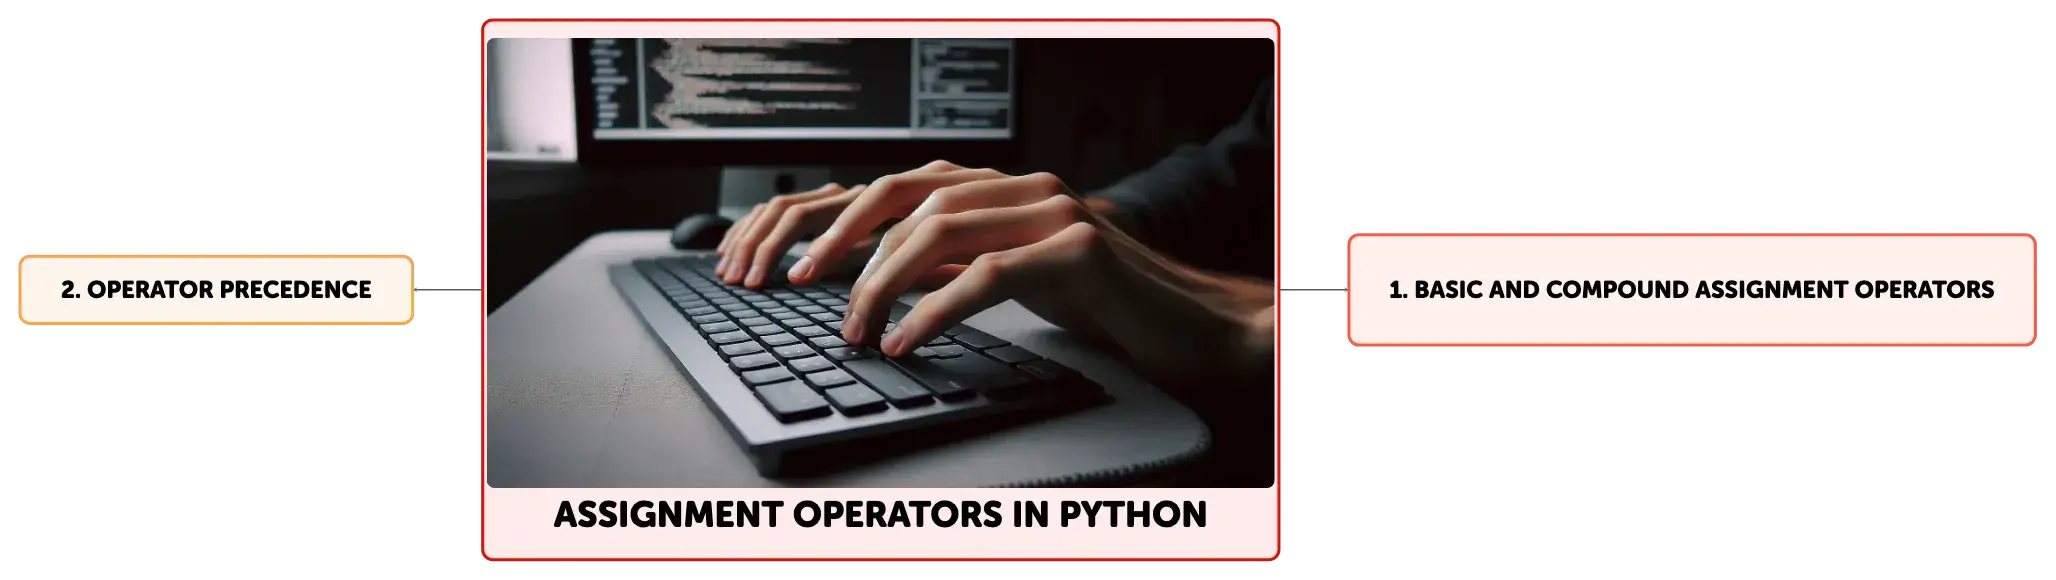 assignment operator in python programming